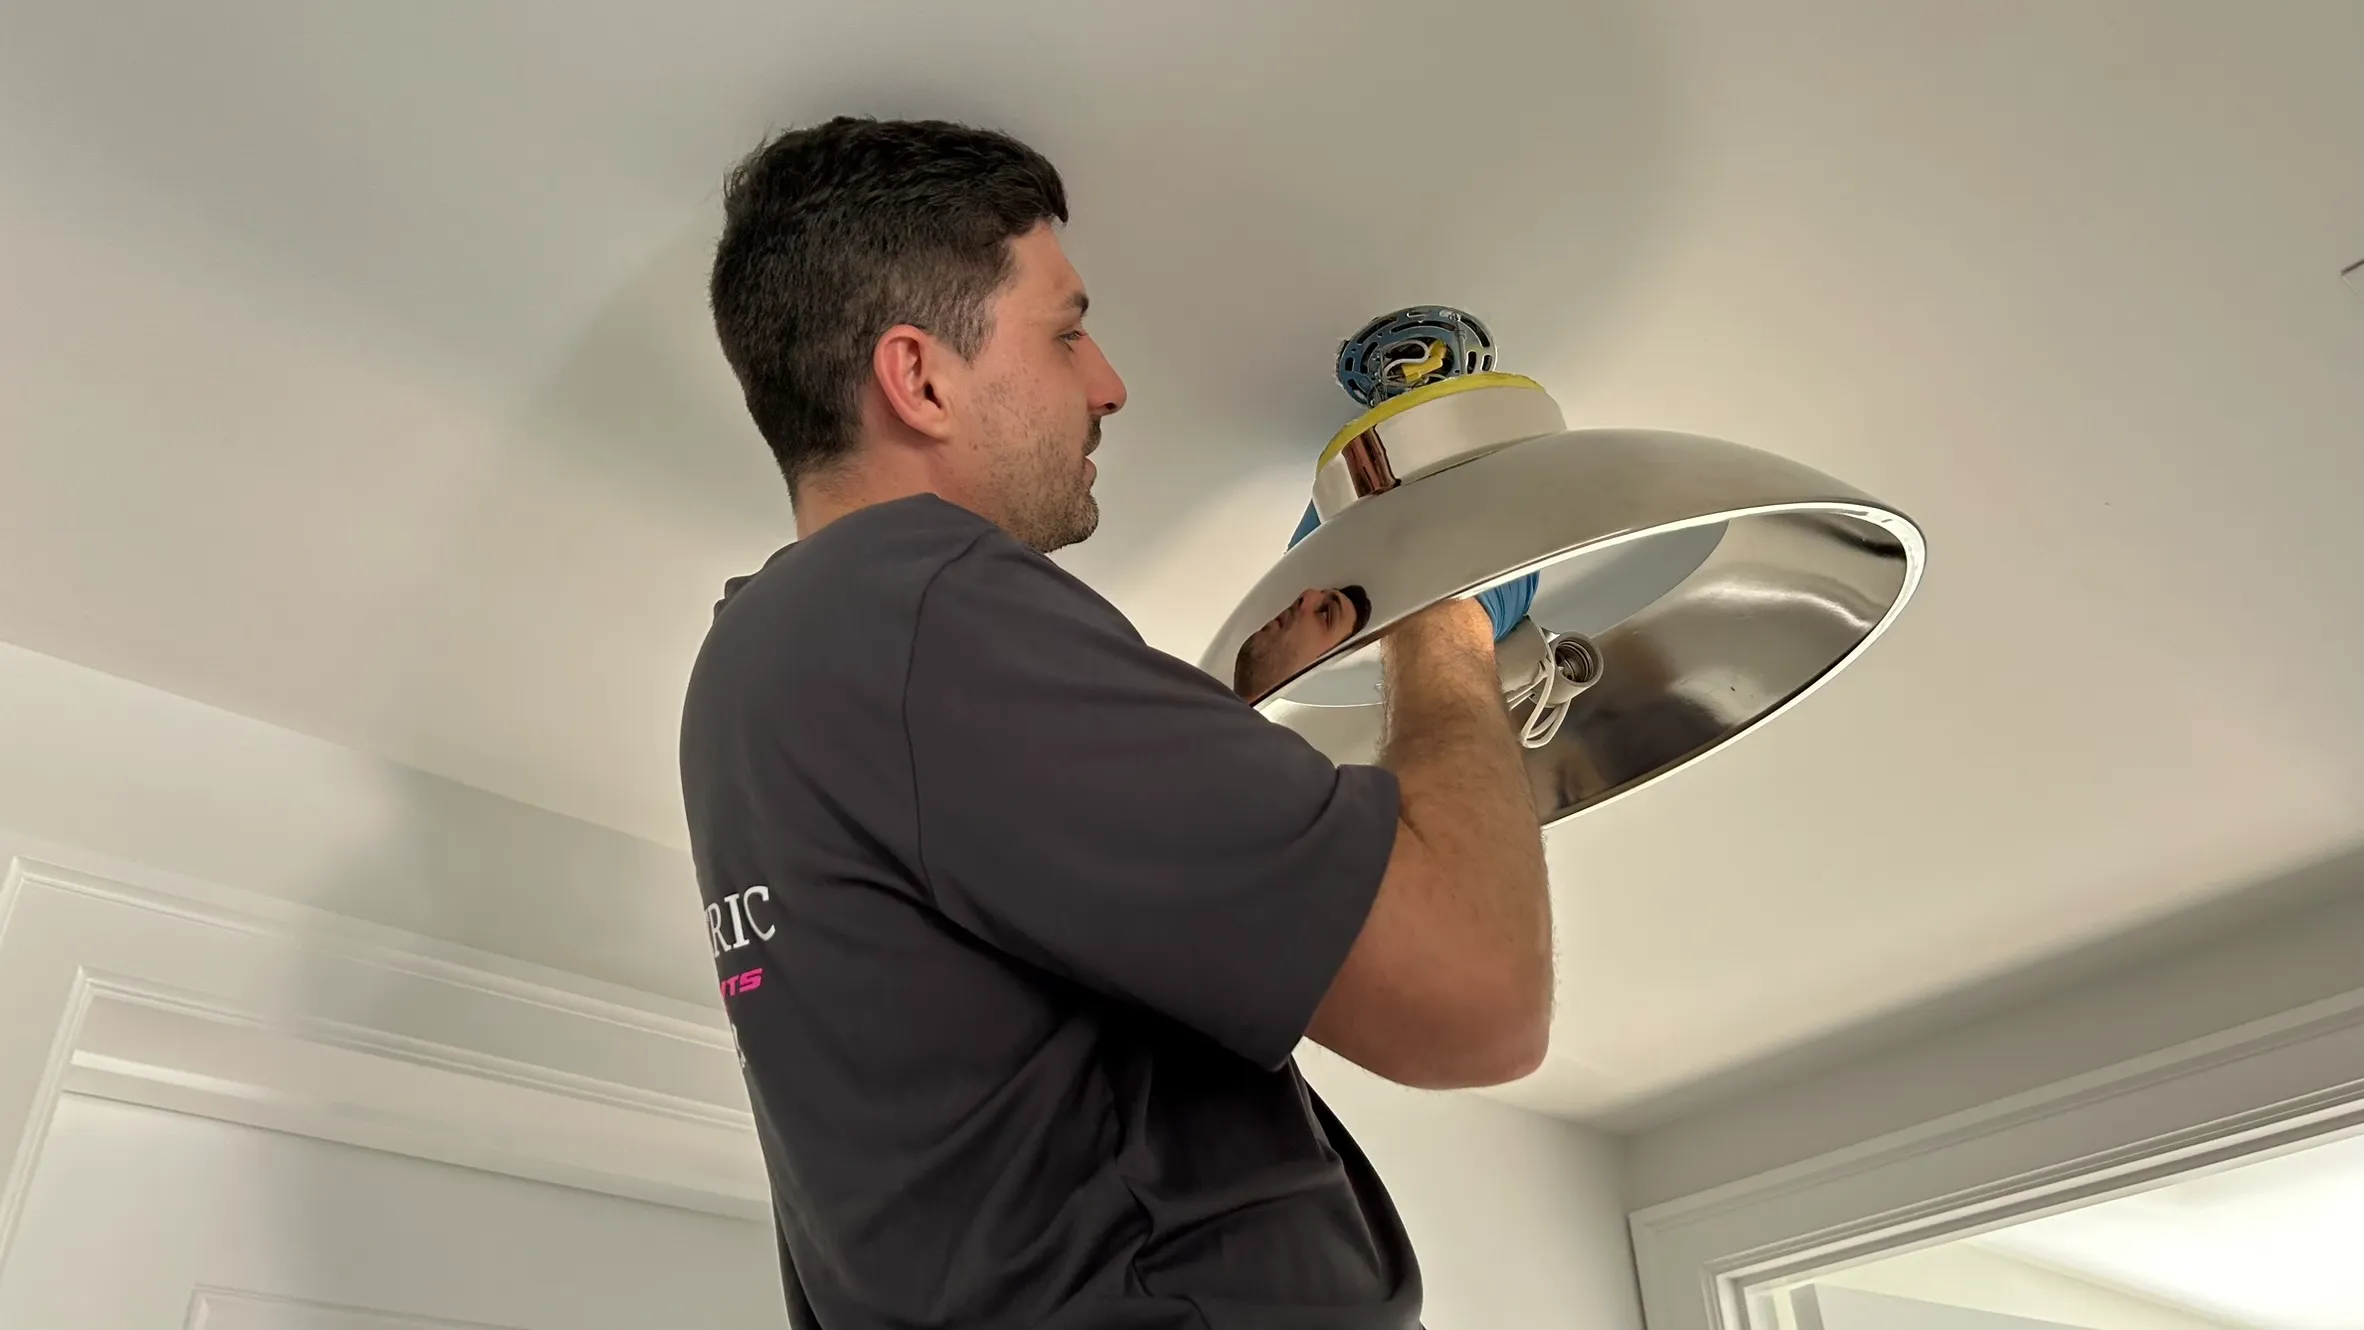 electrician services in palm beach county